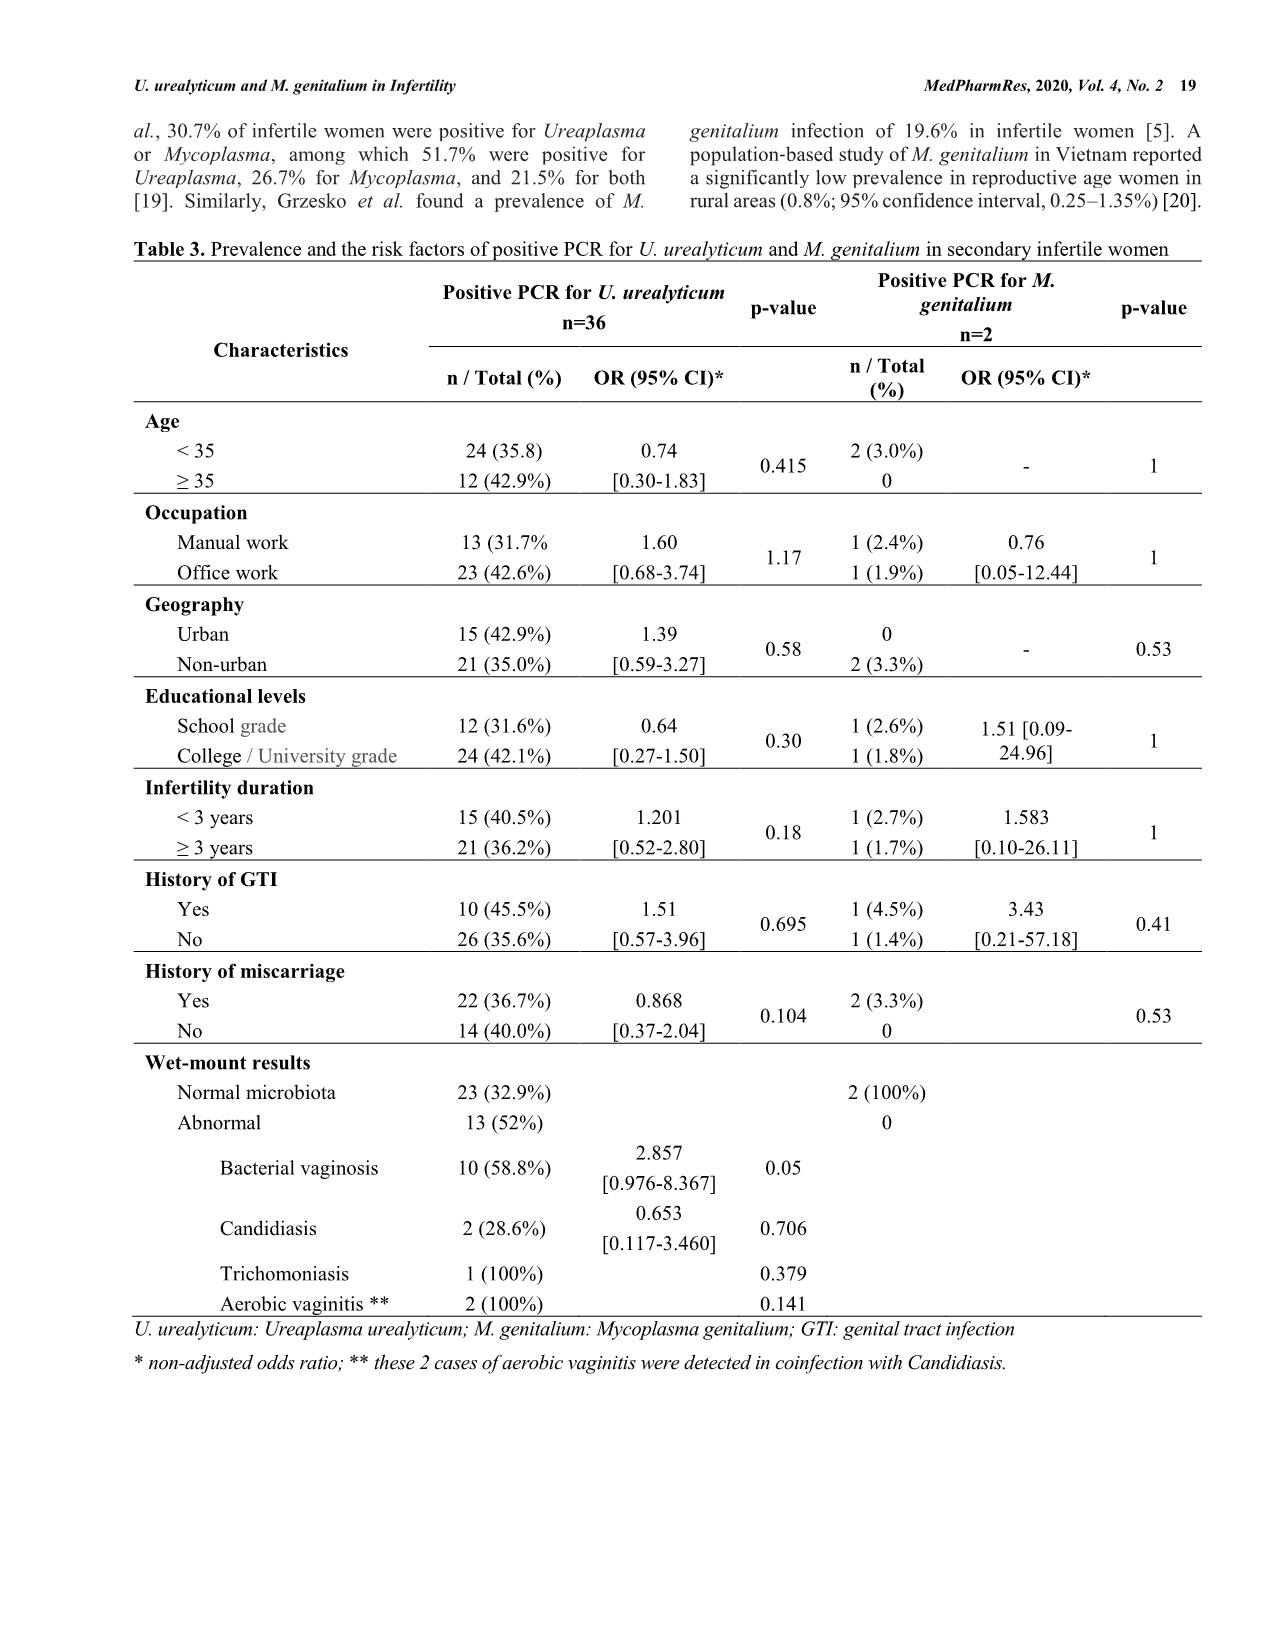 Prevalence and risk factors of Ureplasma urealyticum and Mycoplasma genitalium among women with secondary infertility in Vietnam – A crosssectional study trang 4